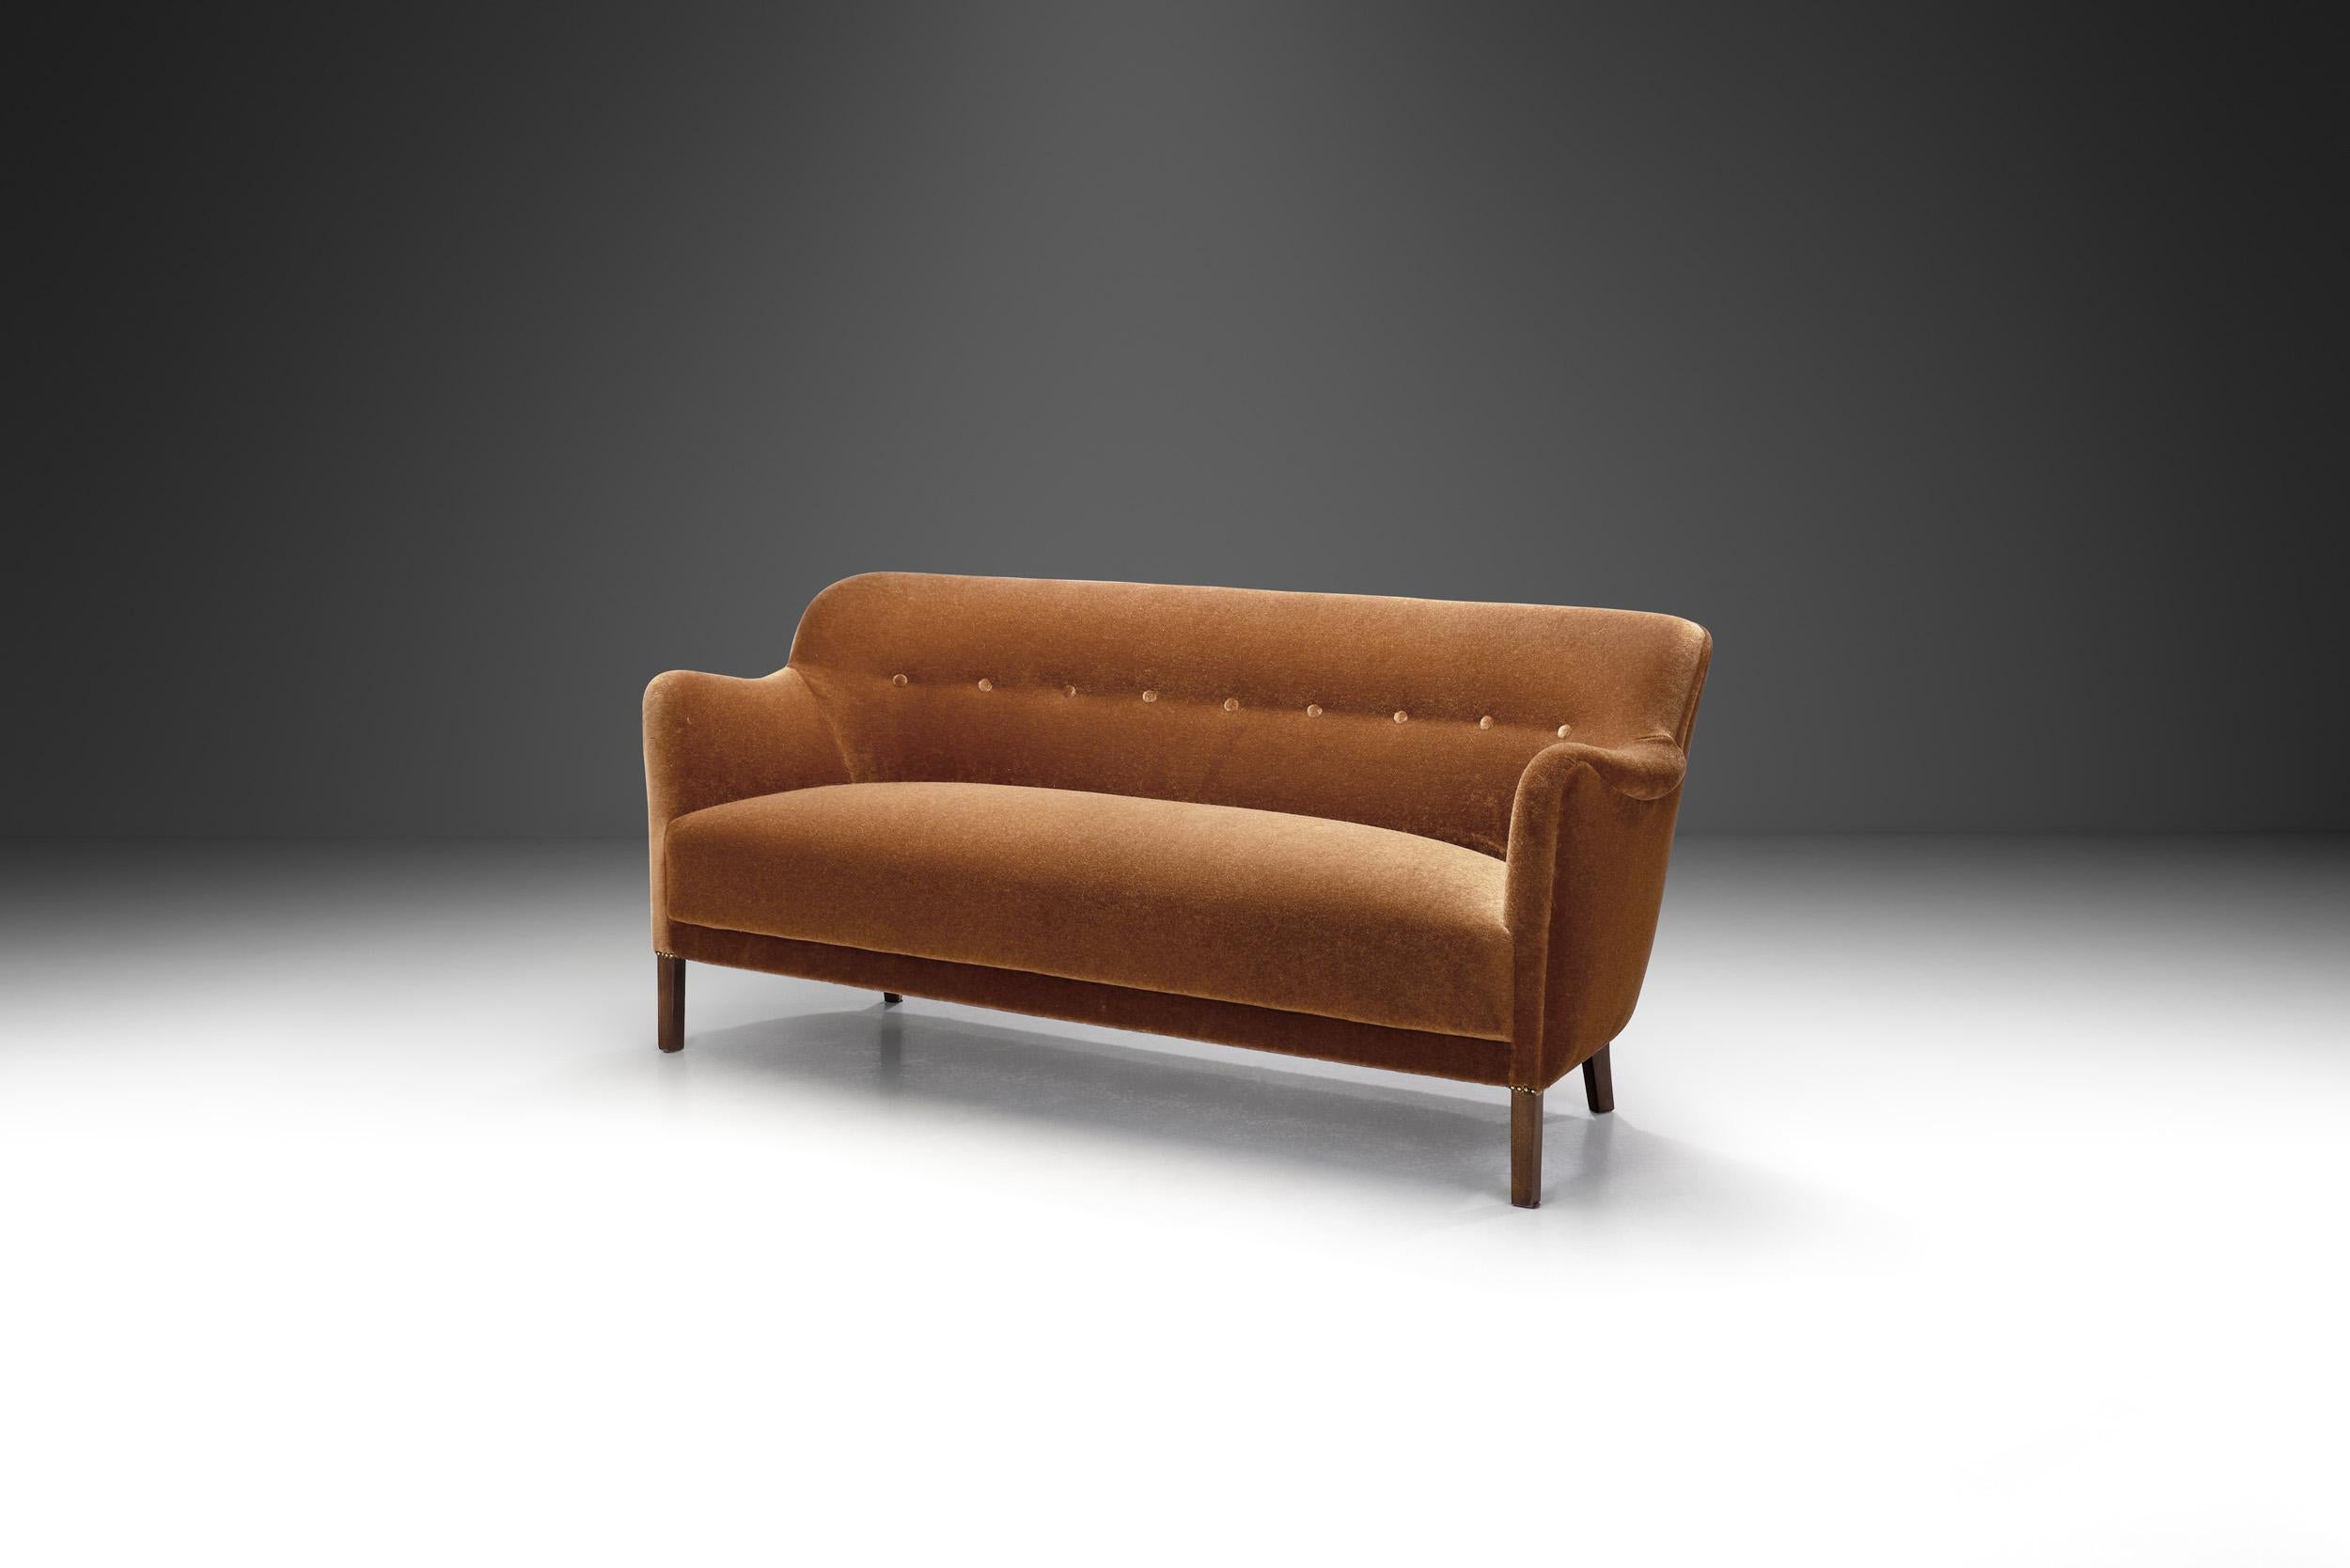 Designed in the early phase of what we know today as mid-century modern, this charming sofa is evidence of how traditional Danish craftsmanship was brought into modernism.

The sofa’s curving back and armrests are welcoming, and unmistakable of the